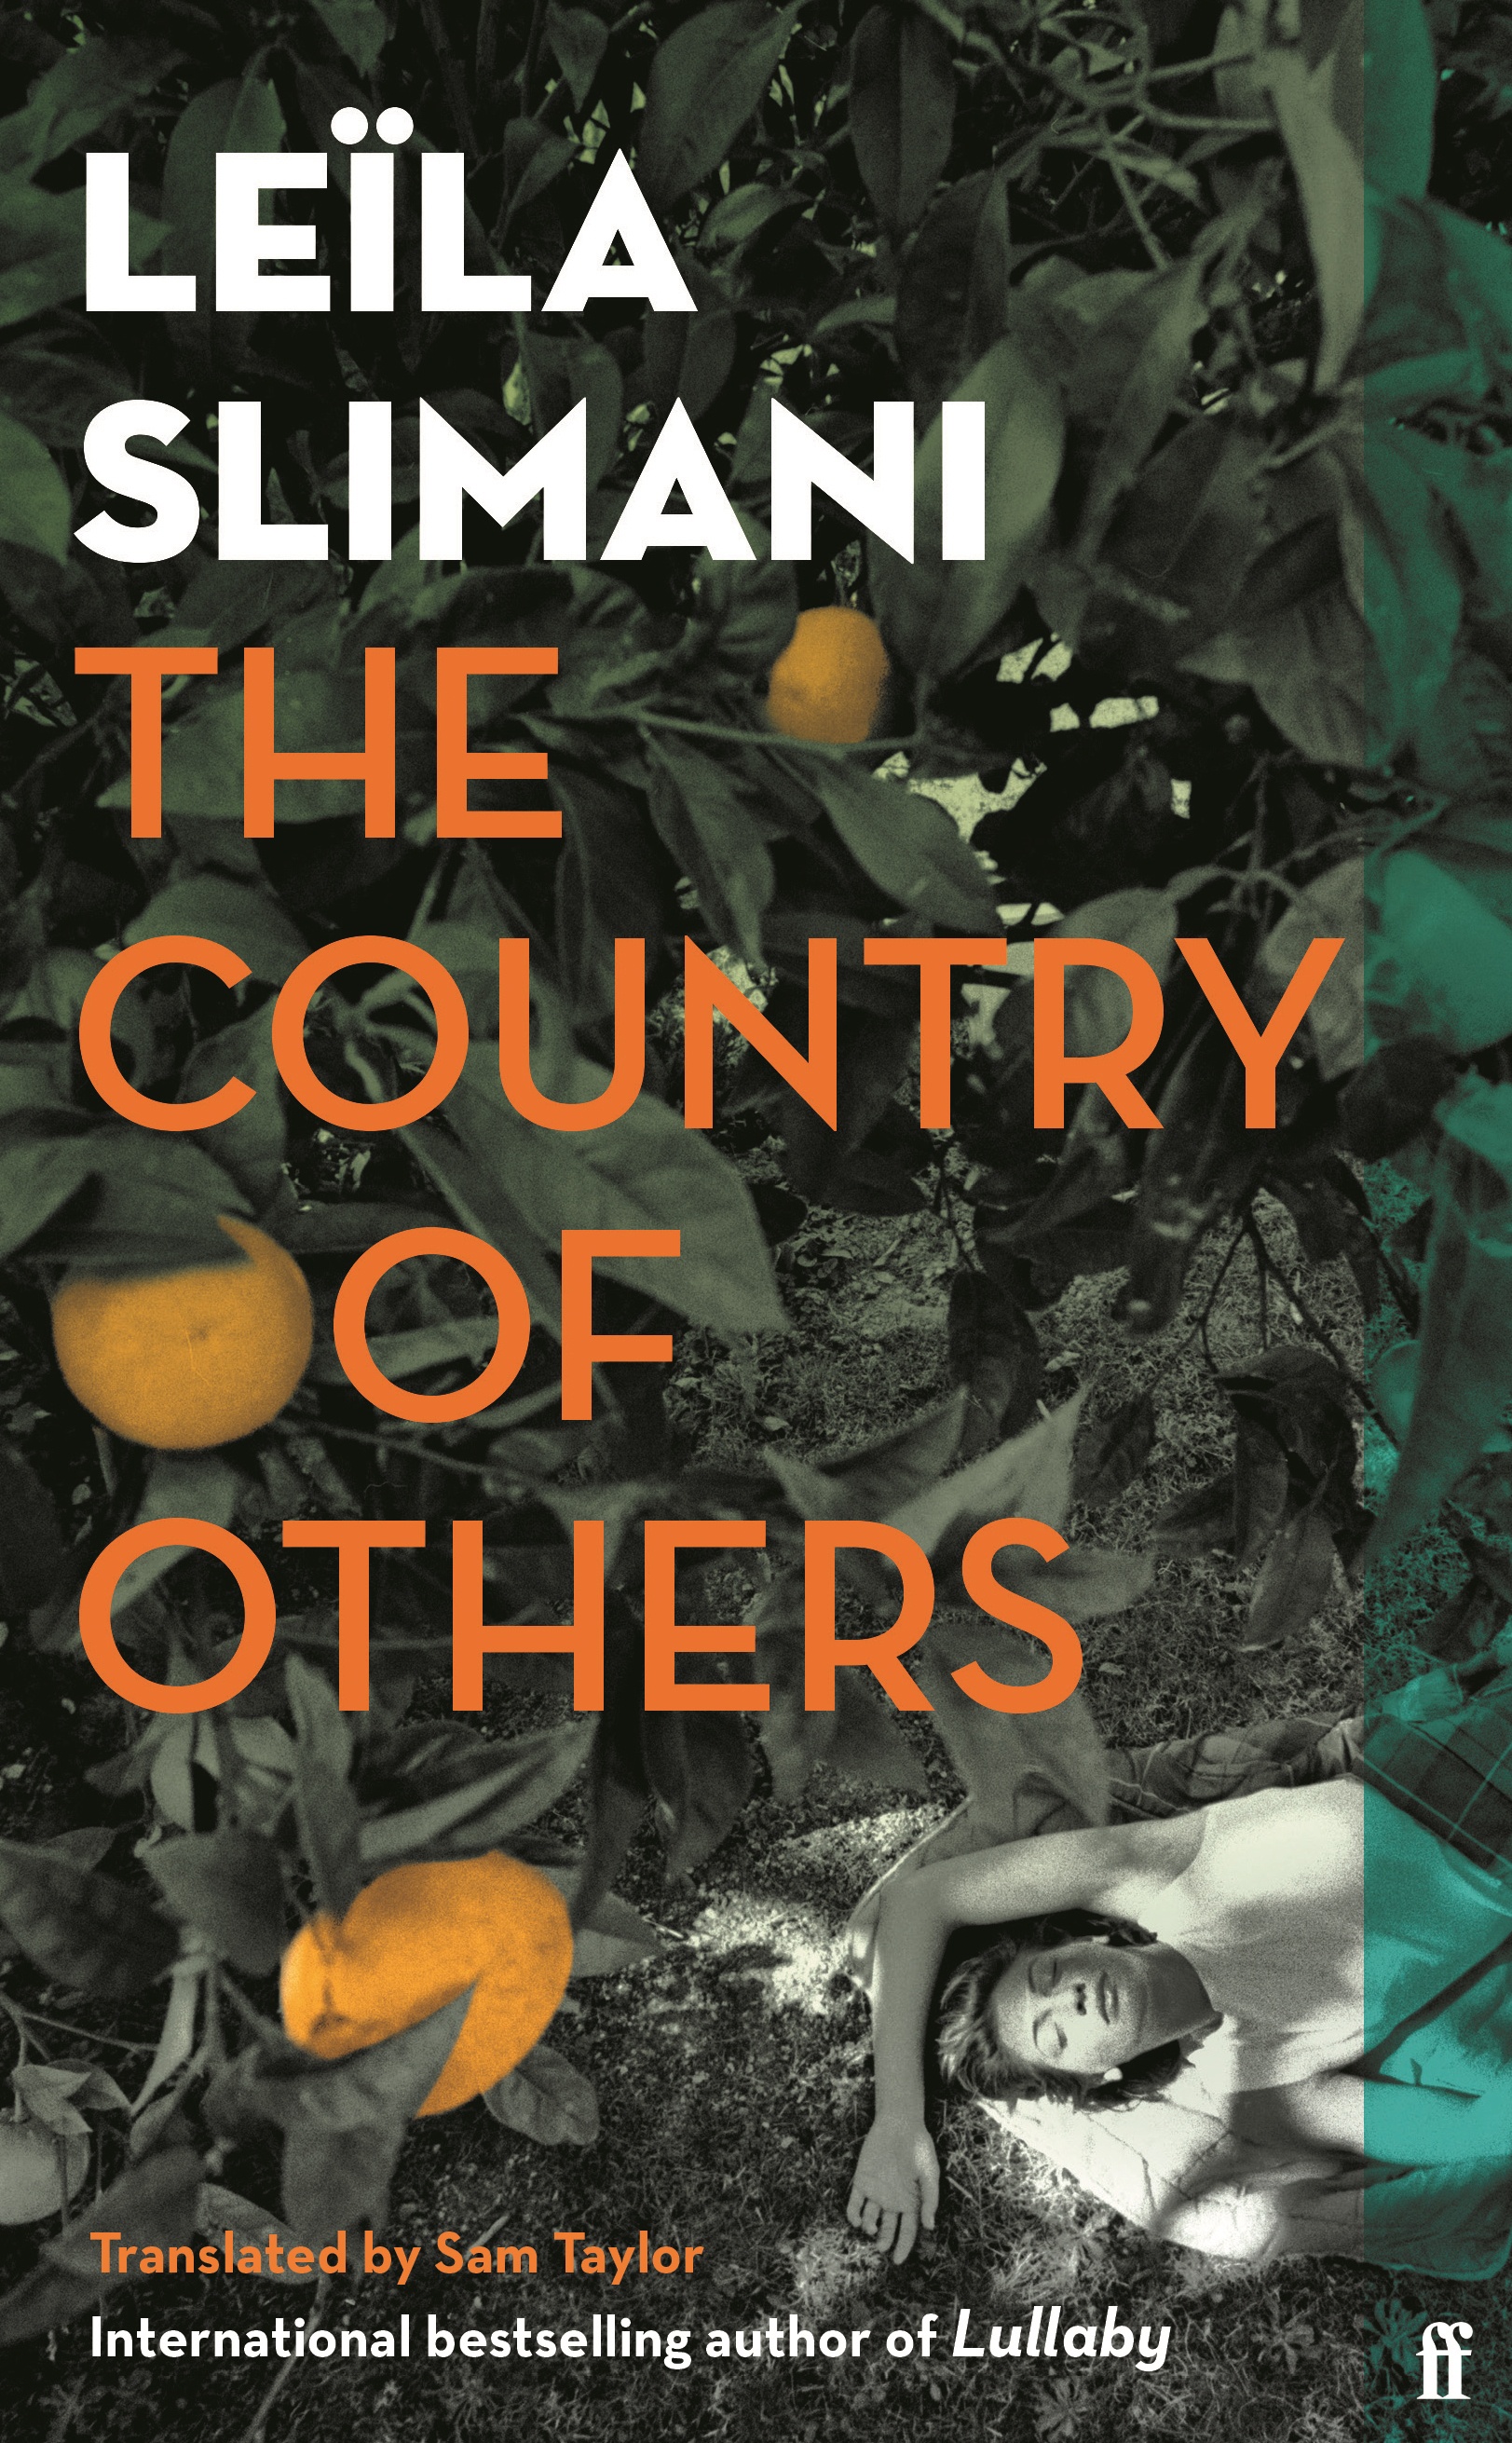 Cover of Slimani's "The Country of Others", translated into English by Sam Taylor (upcoming publication by Faber &amp; Faber on 5 August 2021)